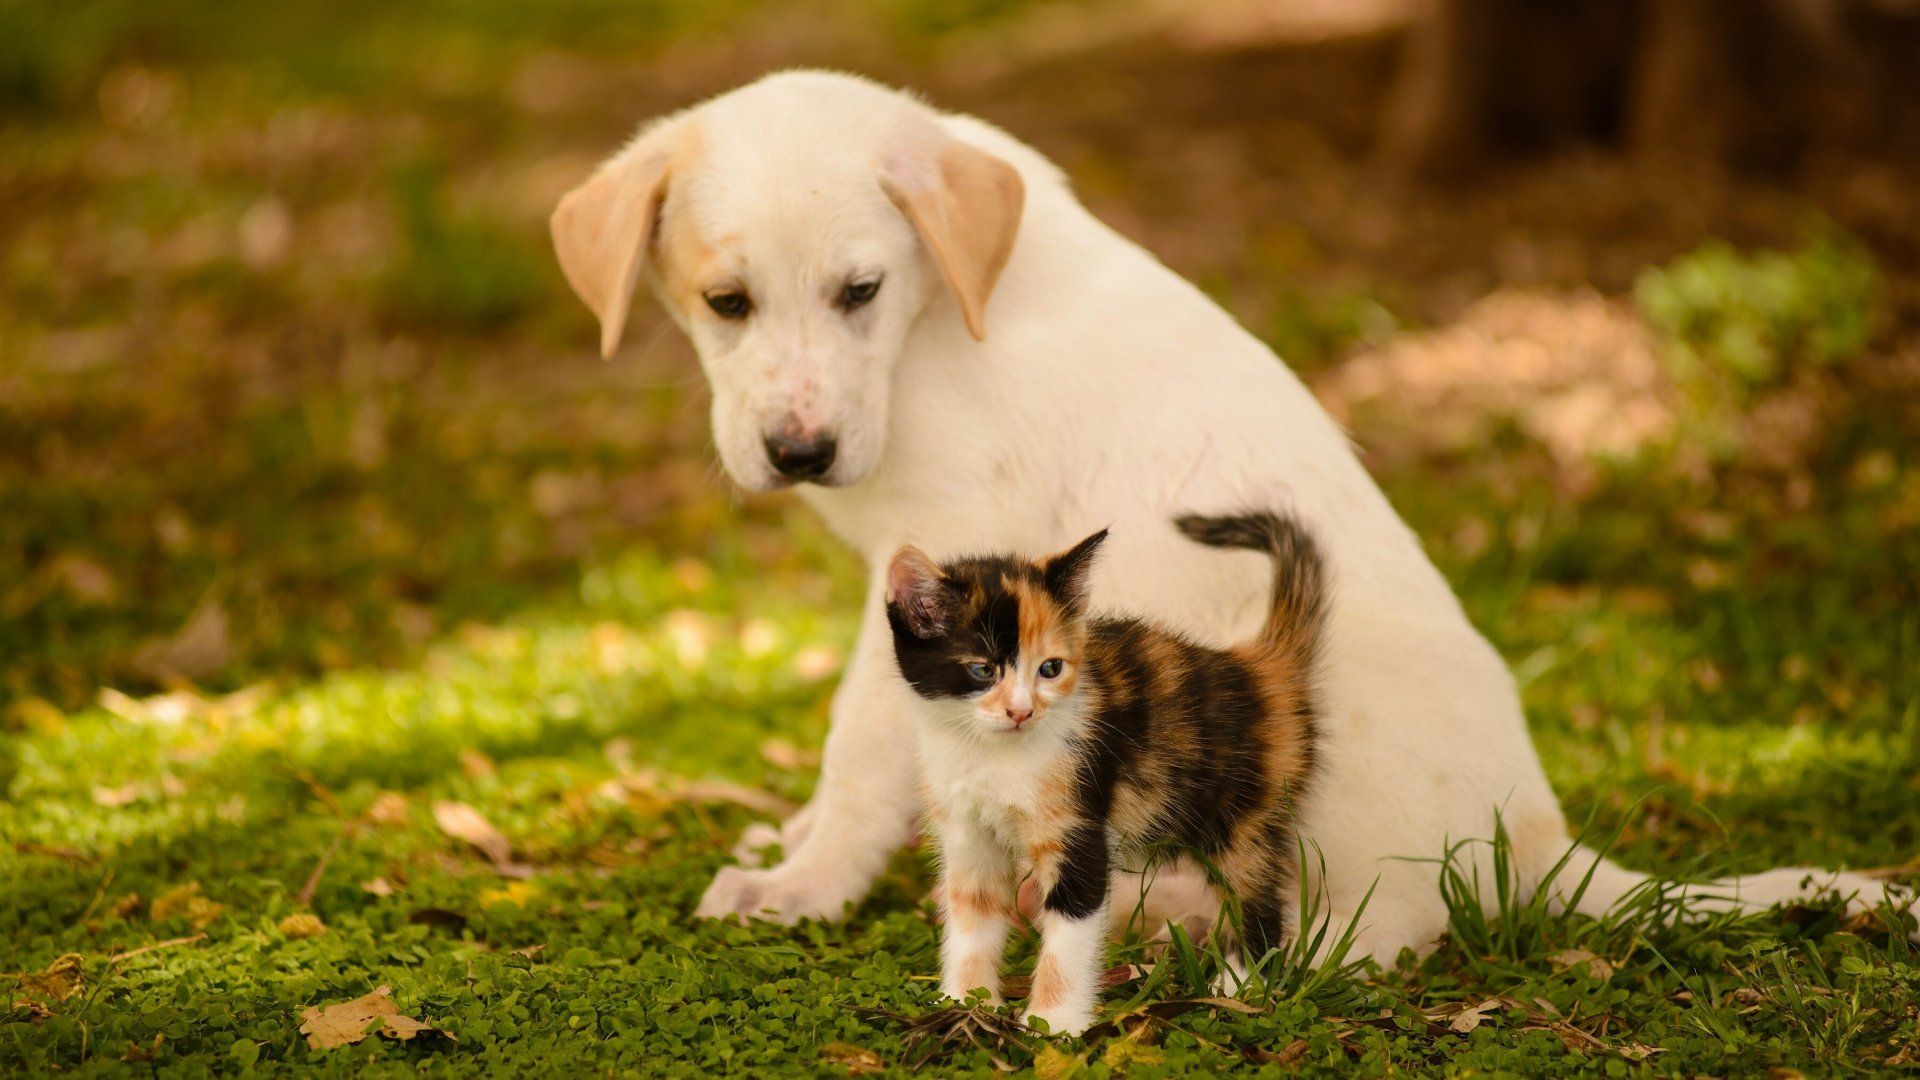 Cute Cats and Dogs Wallpaper Free Cute Cats and Dogs Background